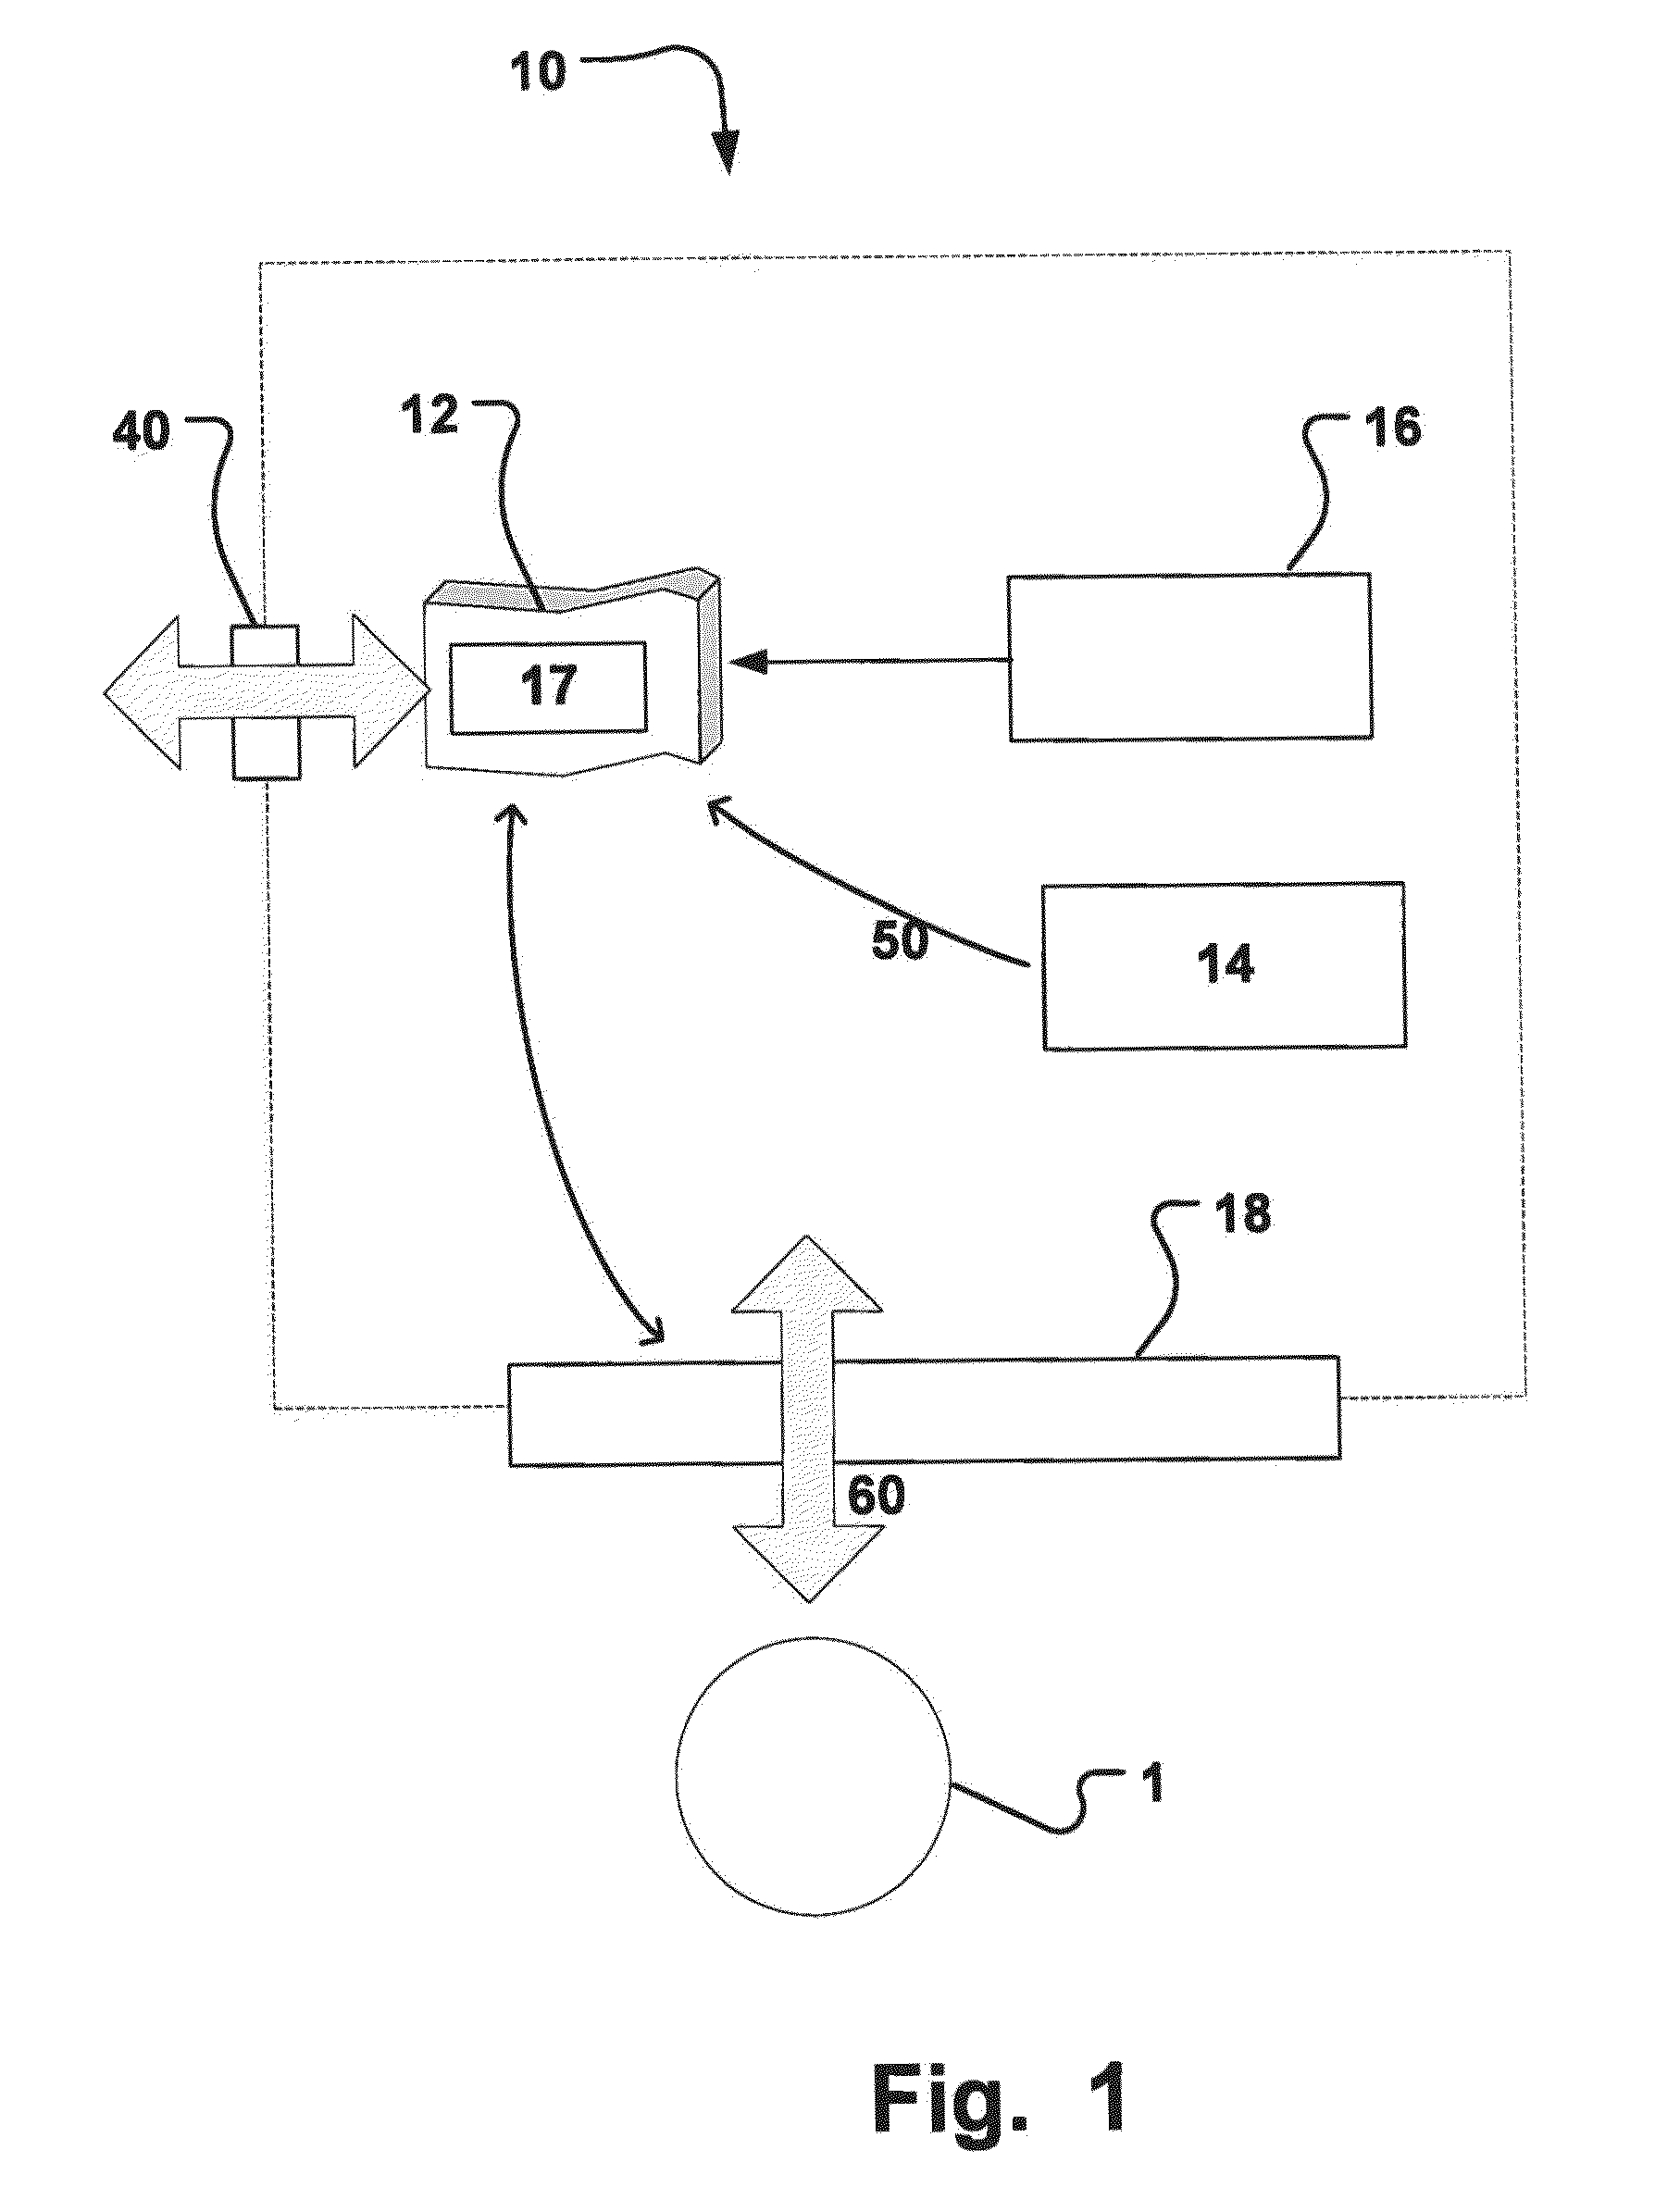 Patient management device, system and method